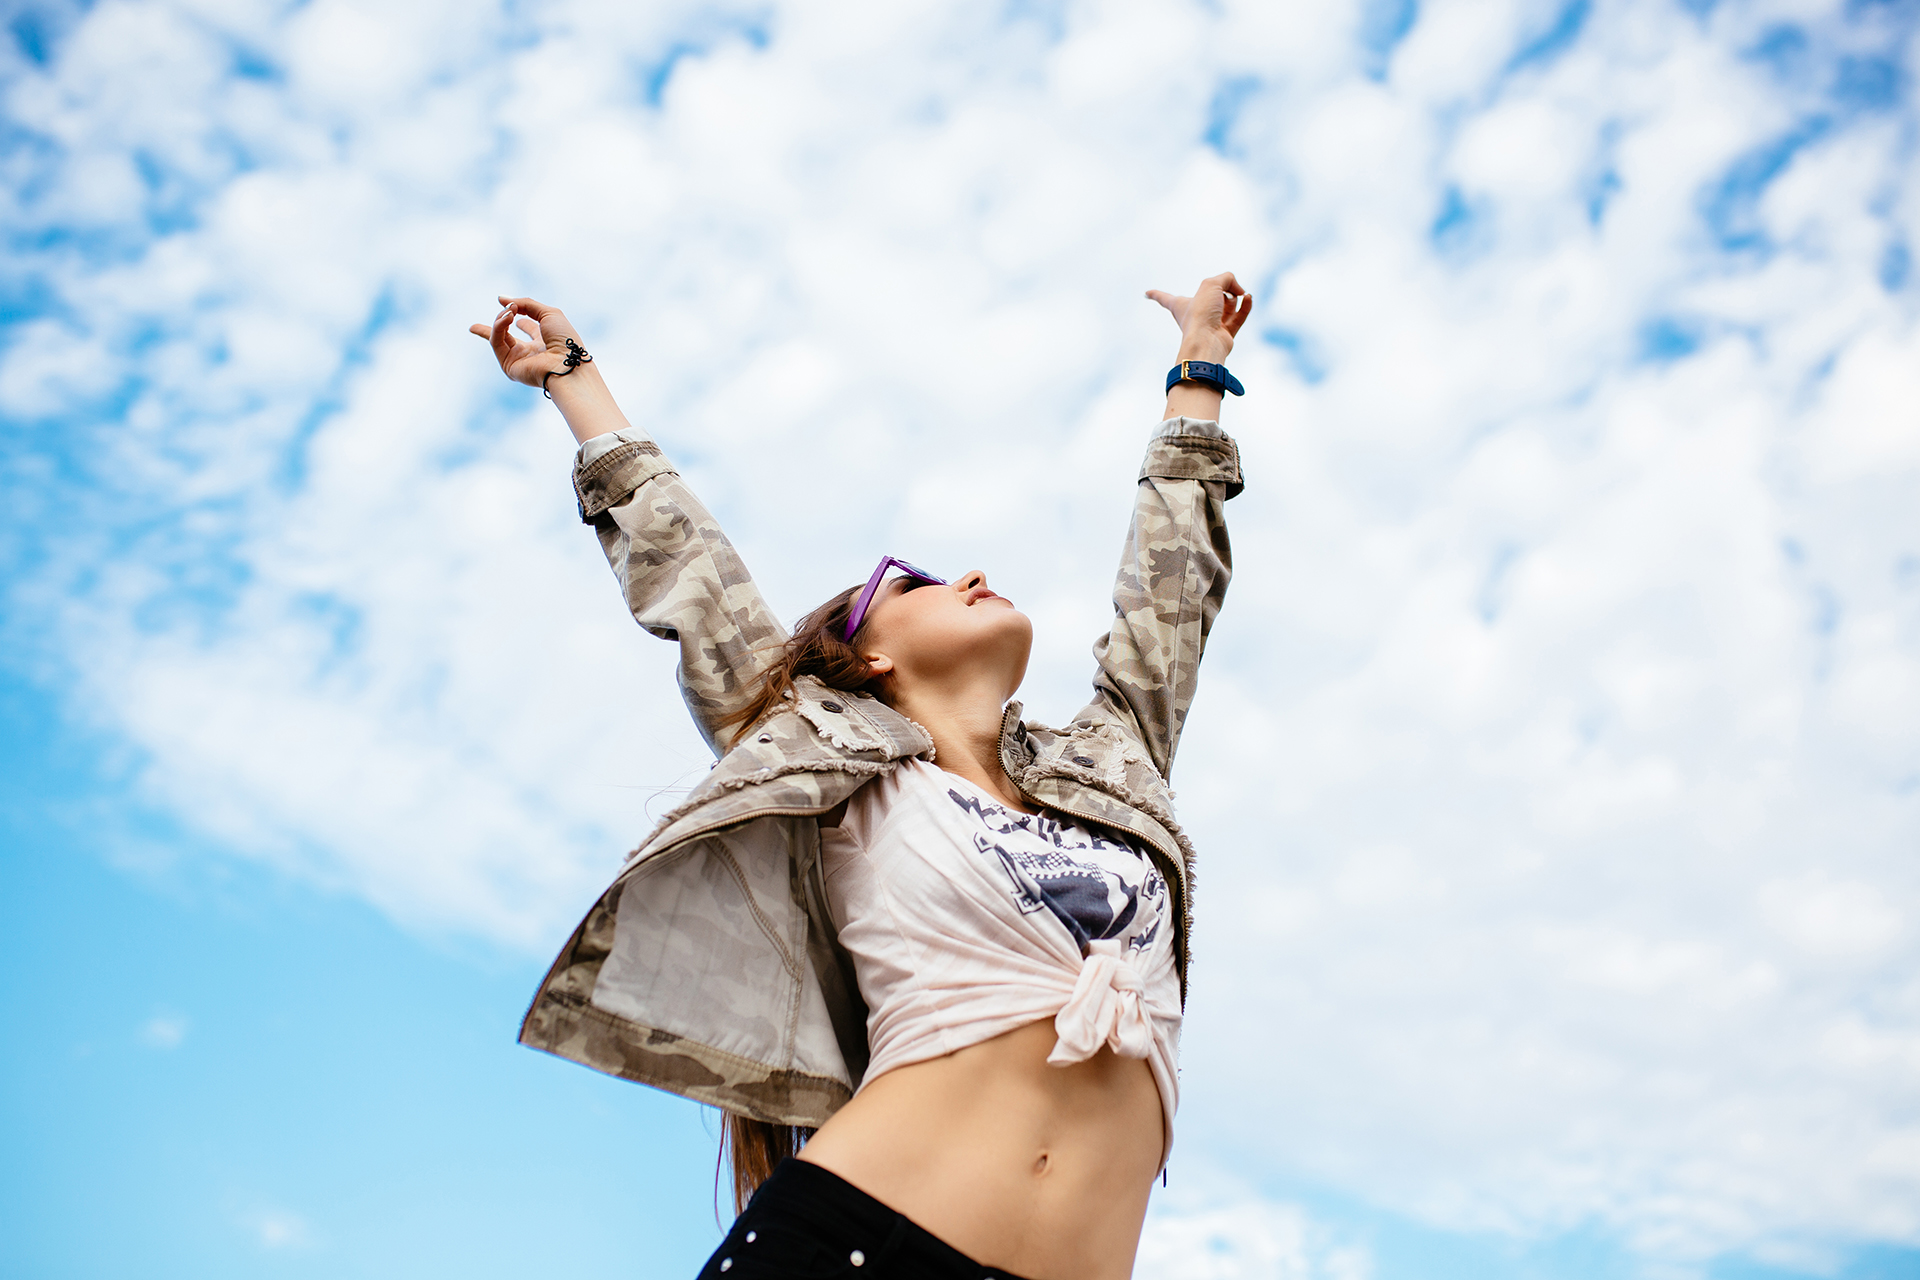 Attractive woman raised her hands up, enjoying perfect day, freedom, standing against the clear sky background, outdoors. Dressed in stylish clothes.